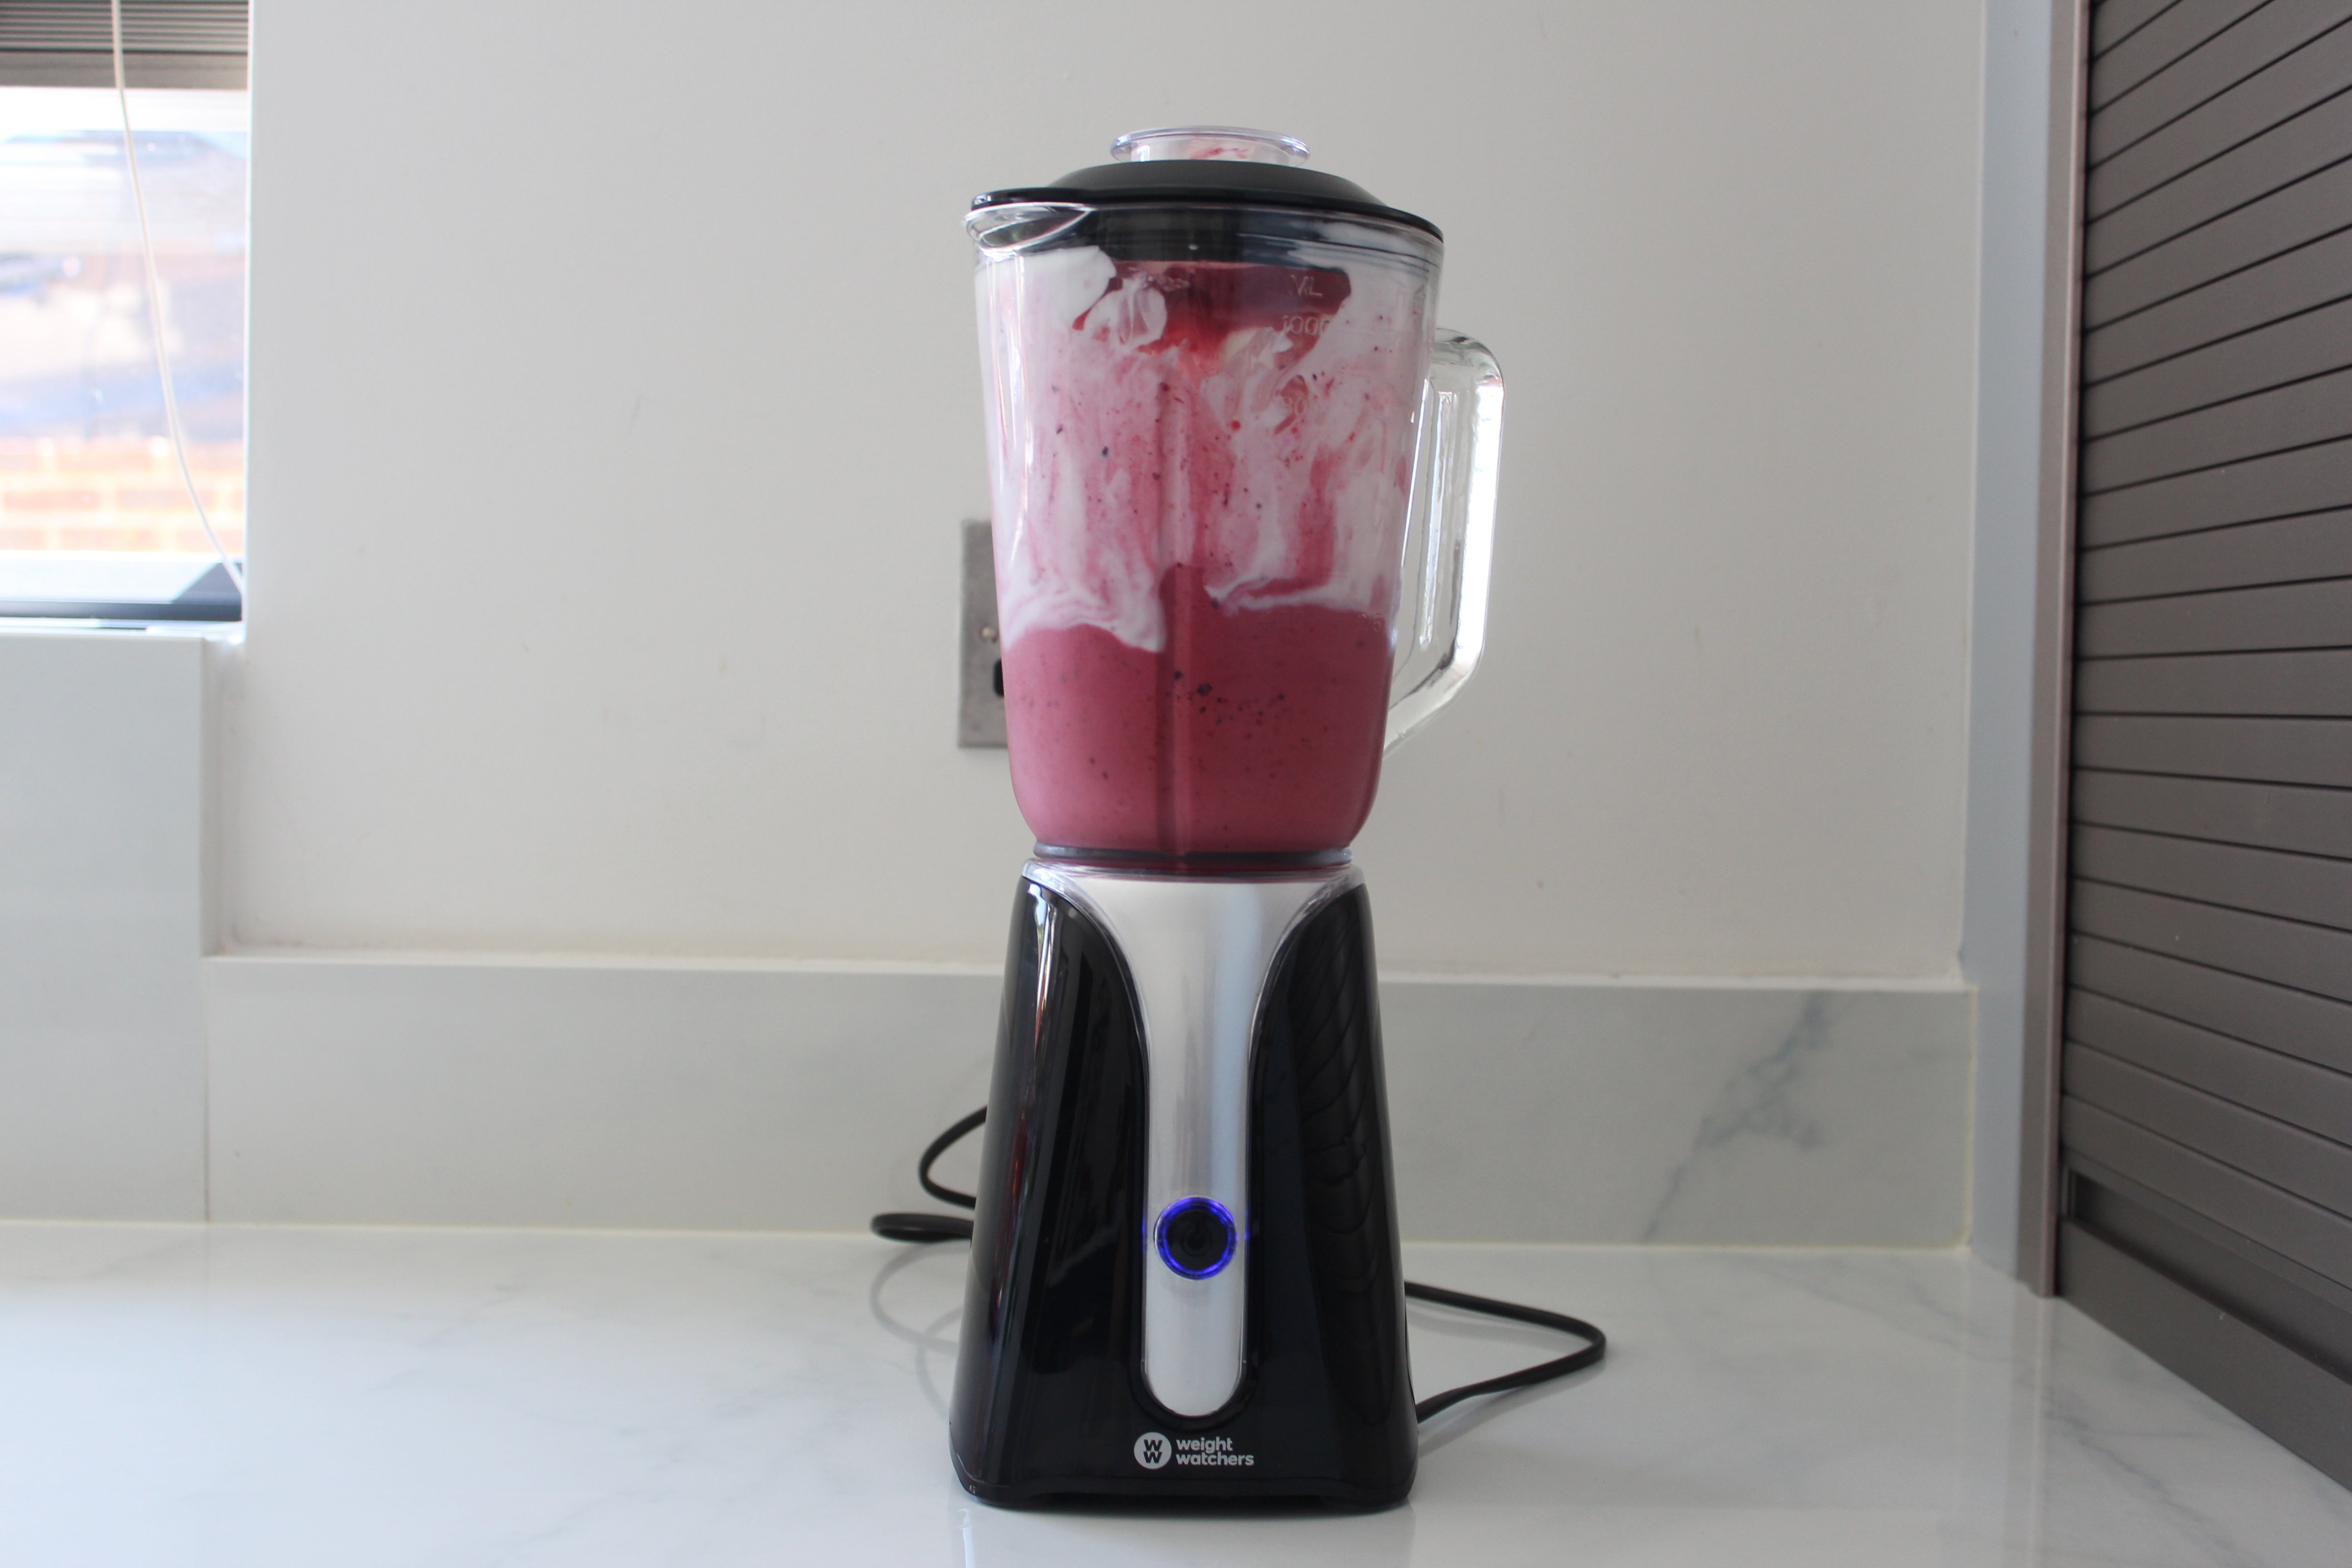 Weight Watchers blender with pink smoothie on kitchen counter.